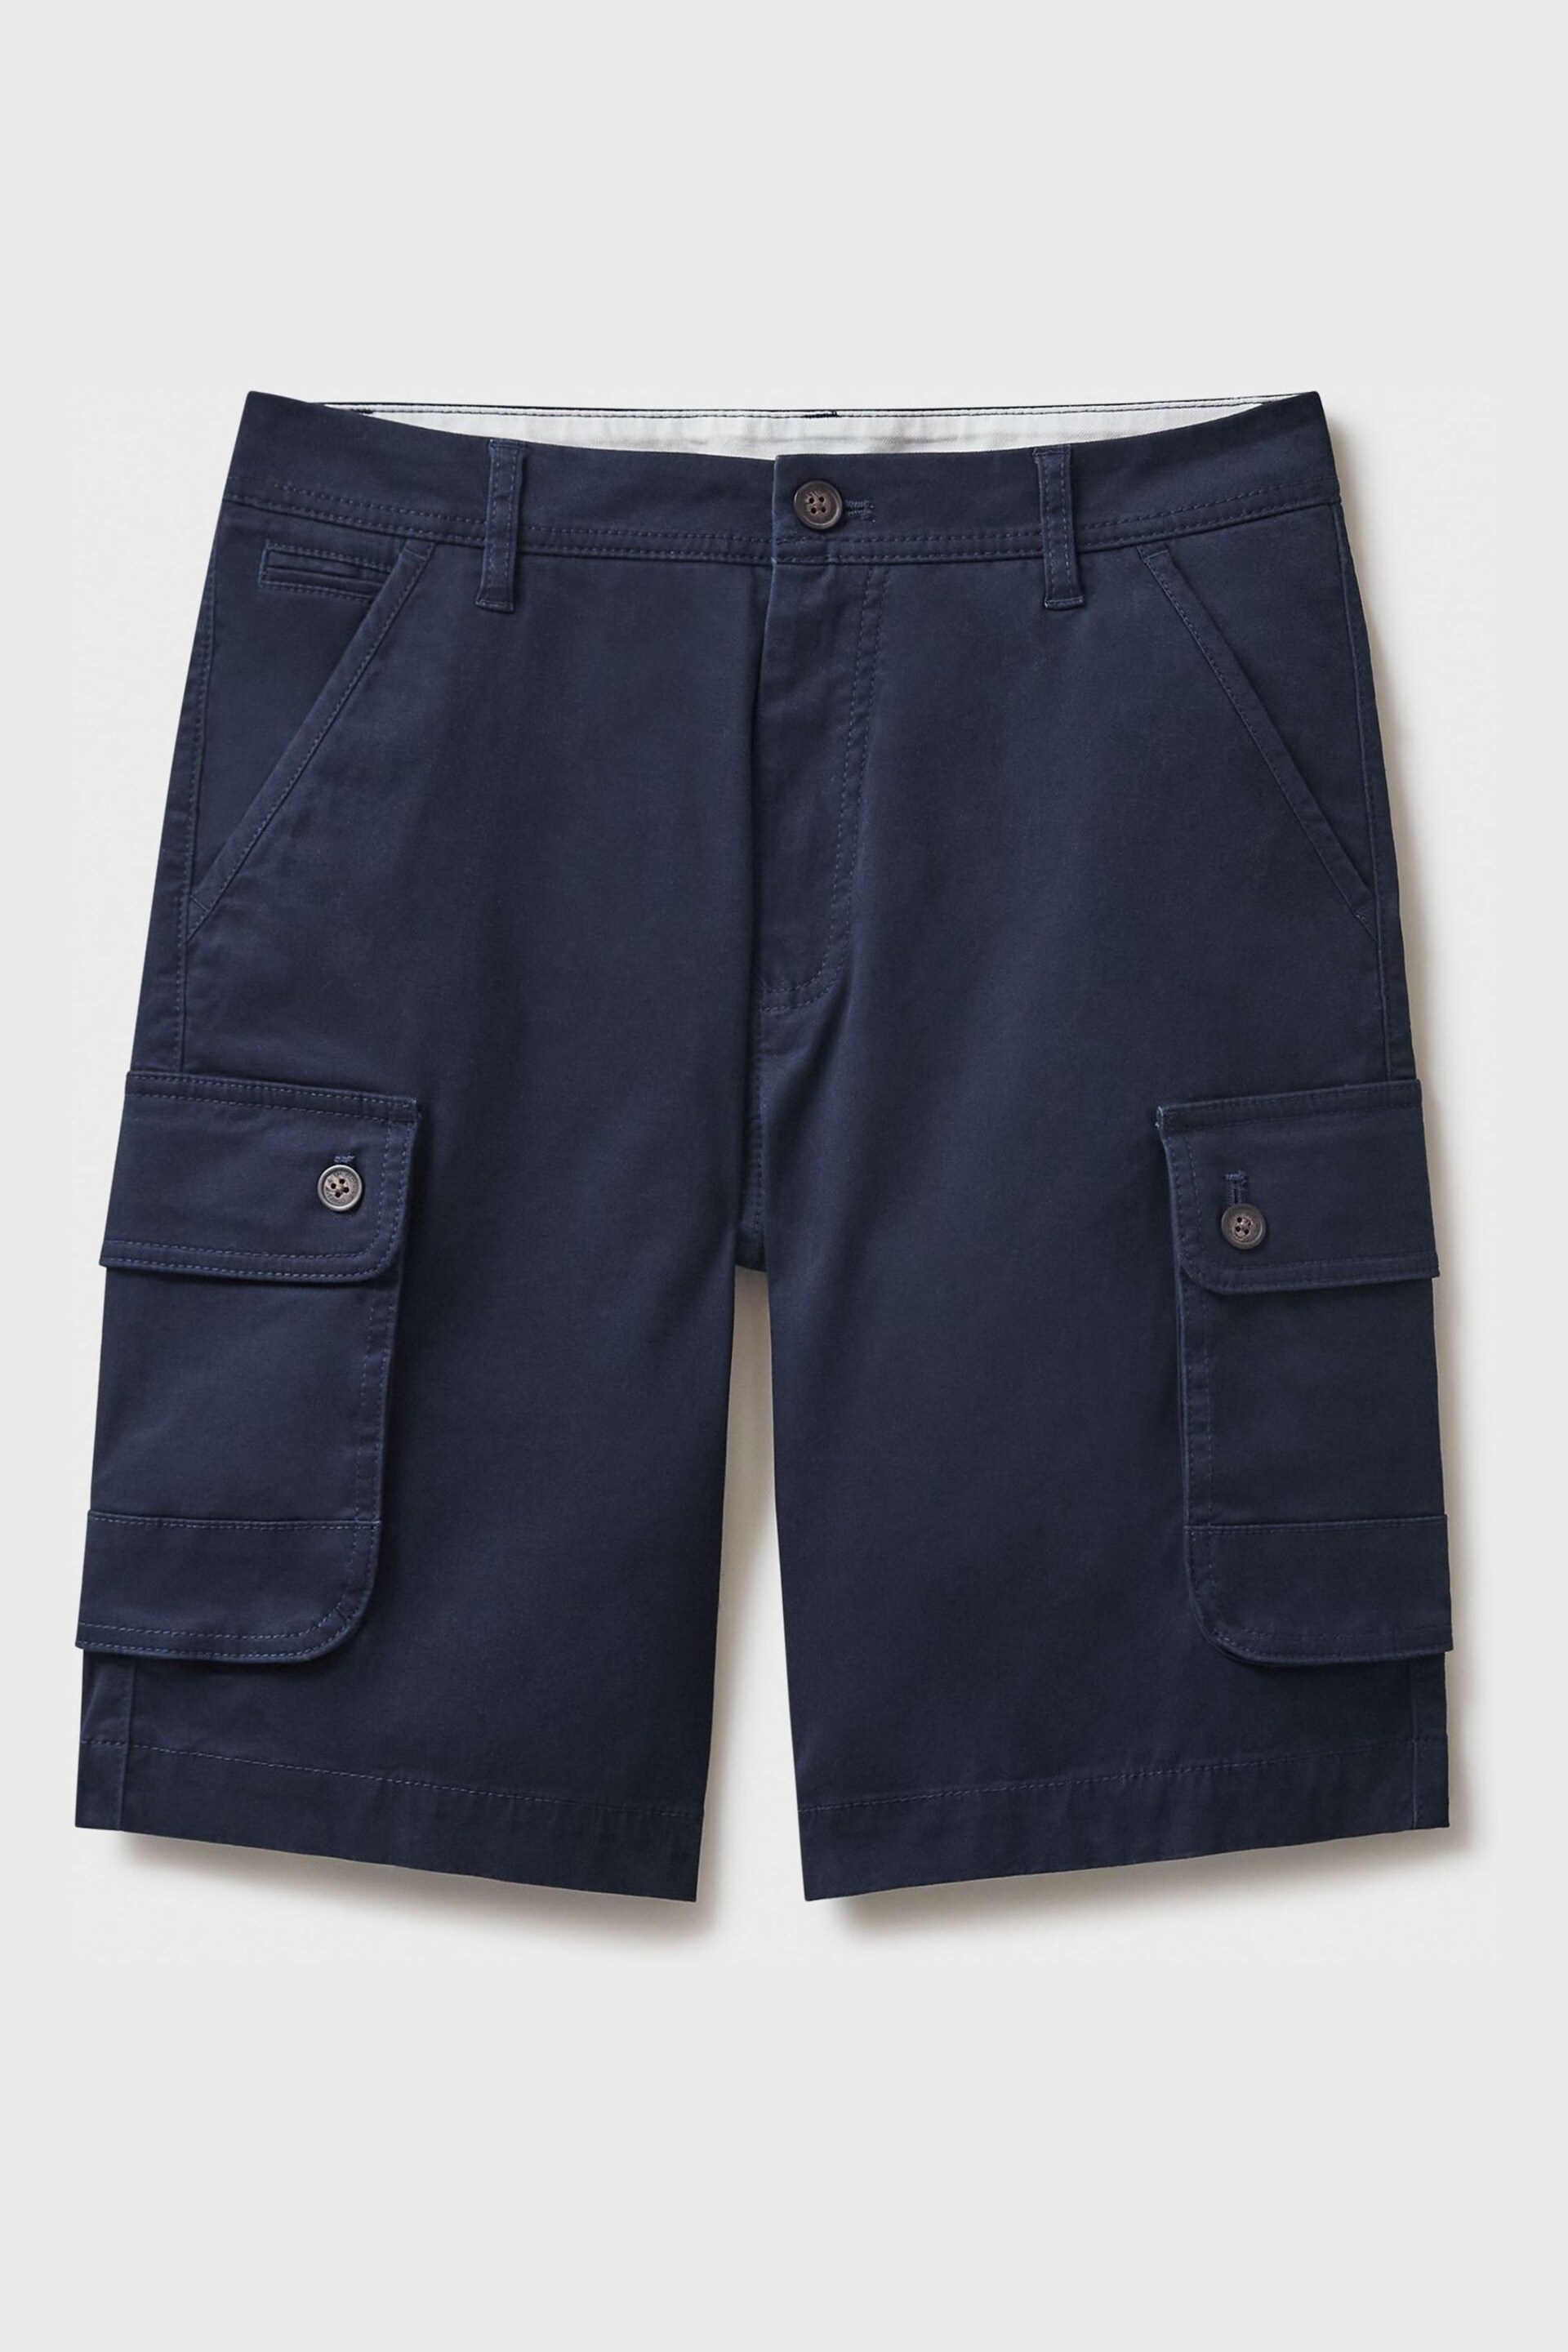 Crew Clothing Company Blue Cotton Classic Casual Shorts - Image 5 of 5